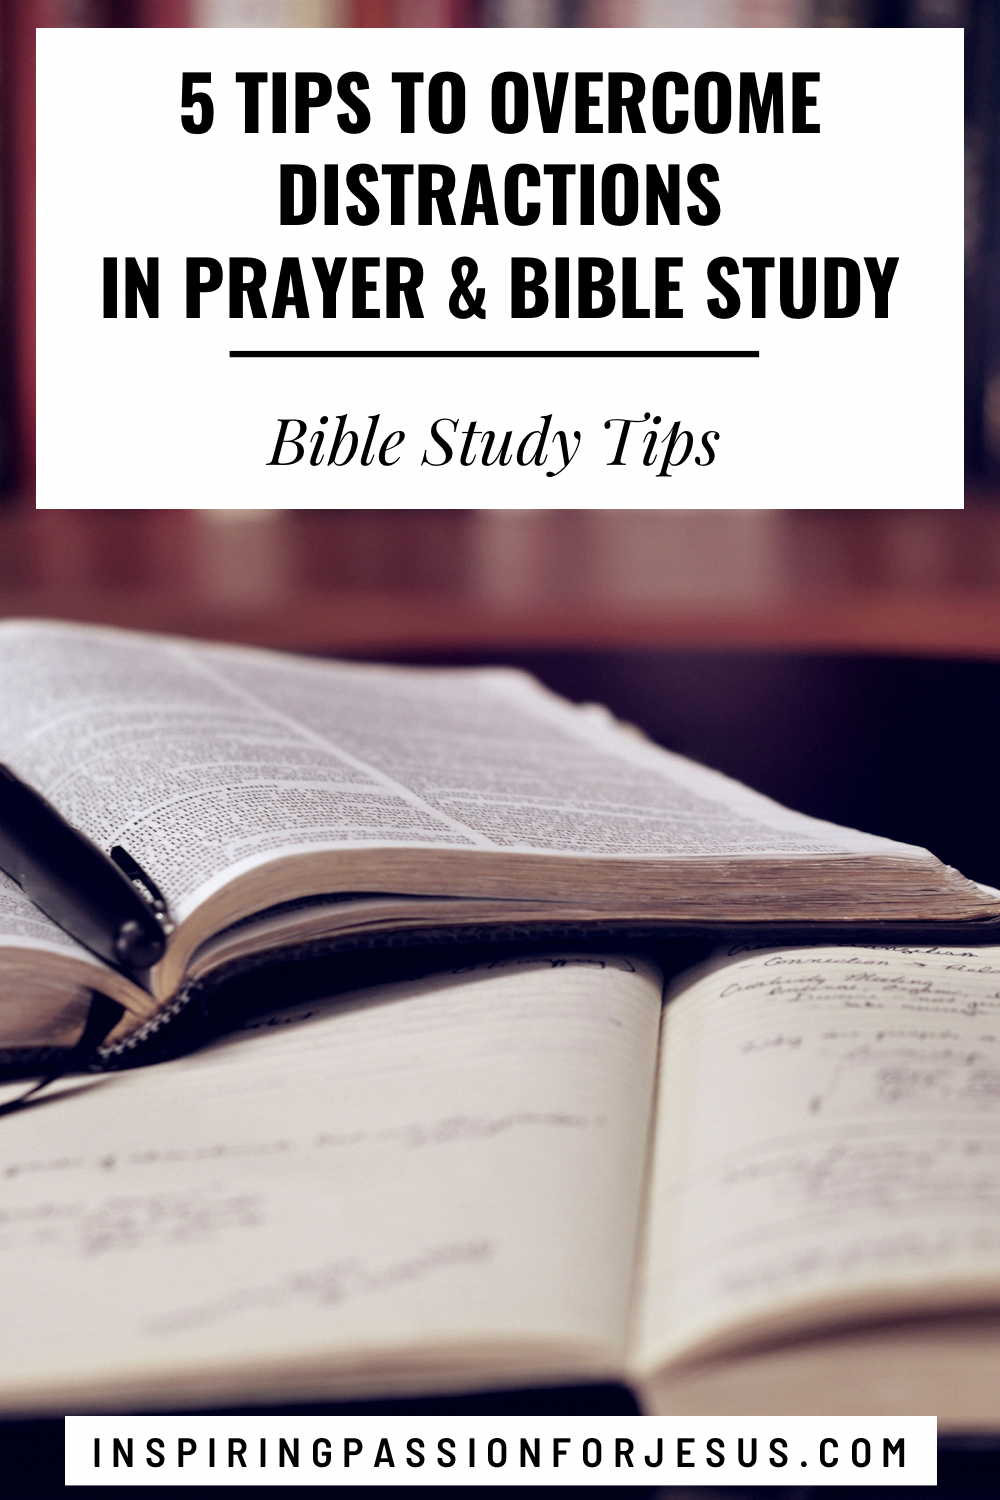 Five Tips to Overcome Distractions in Prayer and Bible Study (title image)